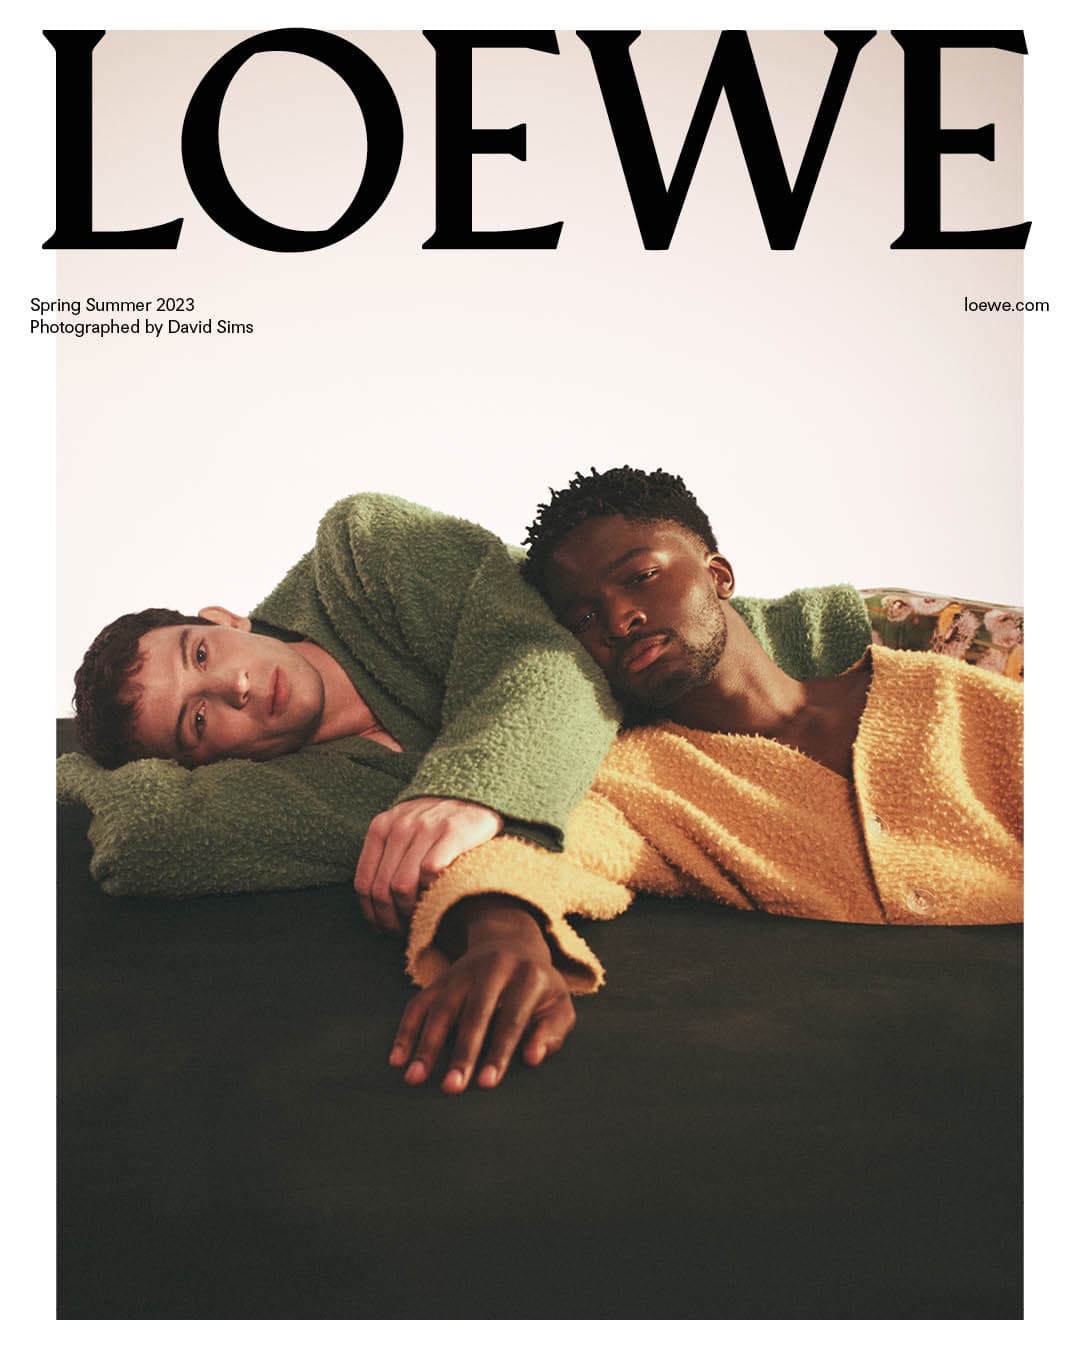 A Study in Character: The Psychology of Silent Communication in LOEWE's  Surreal Fall/Winter 2023 Campaign